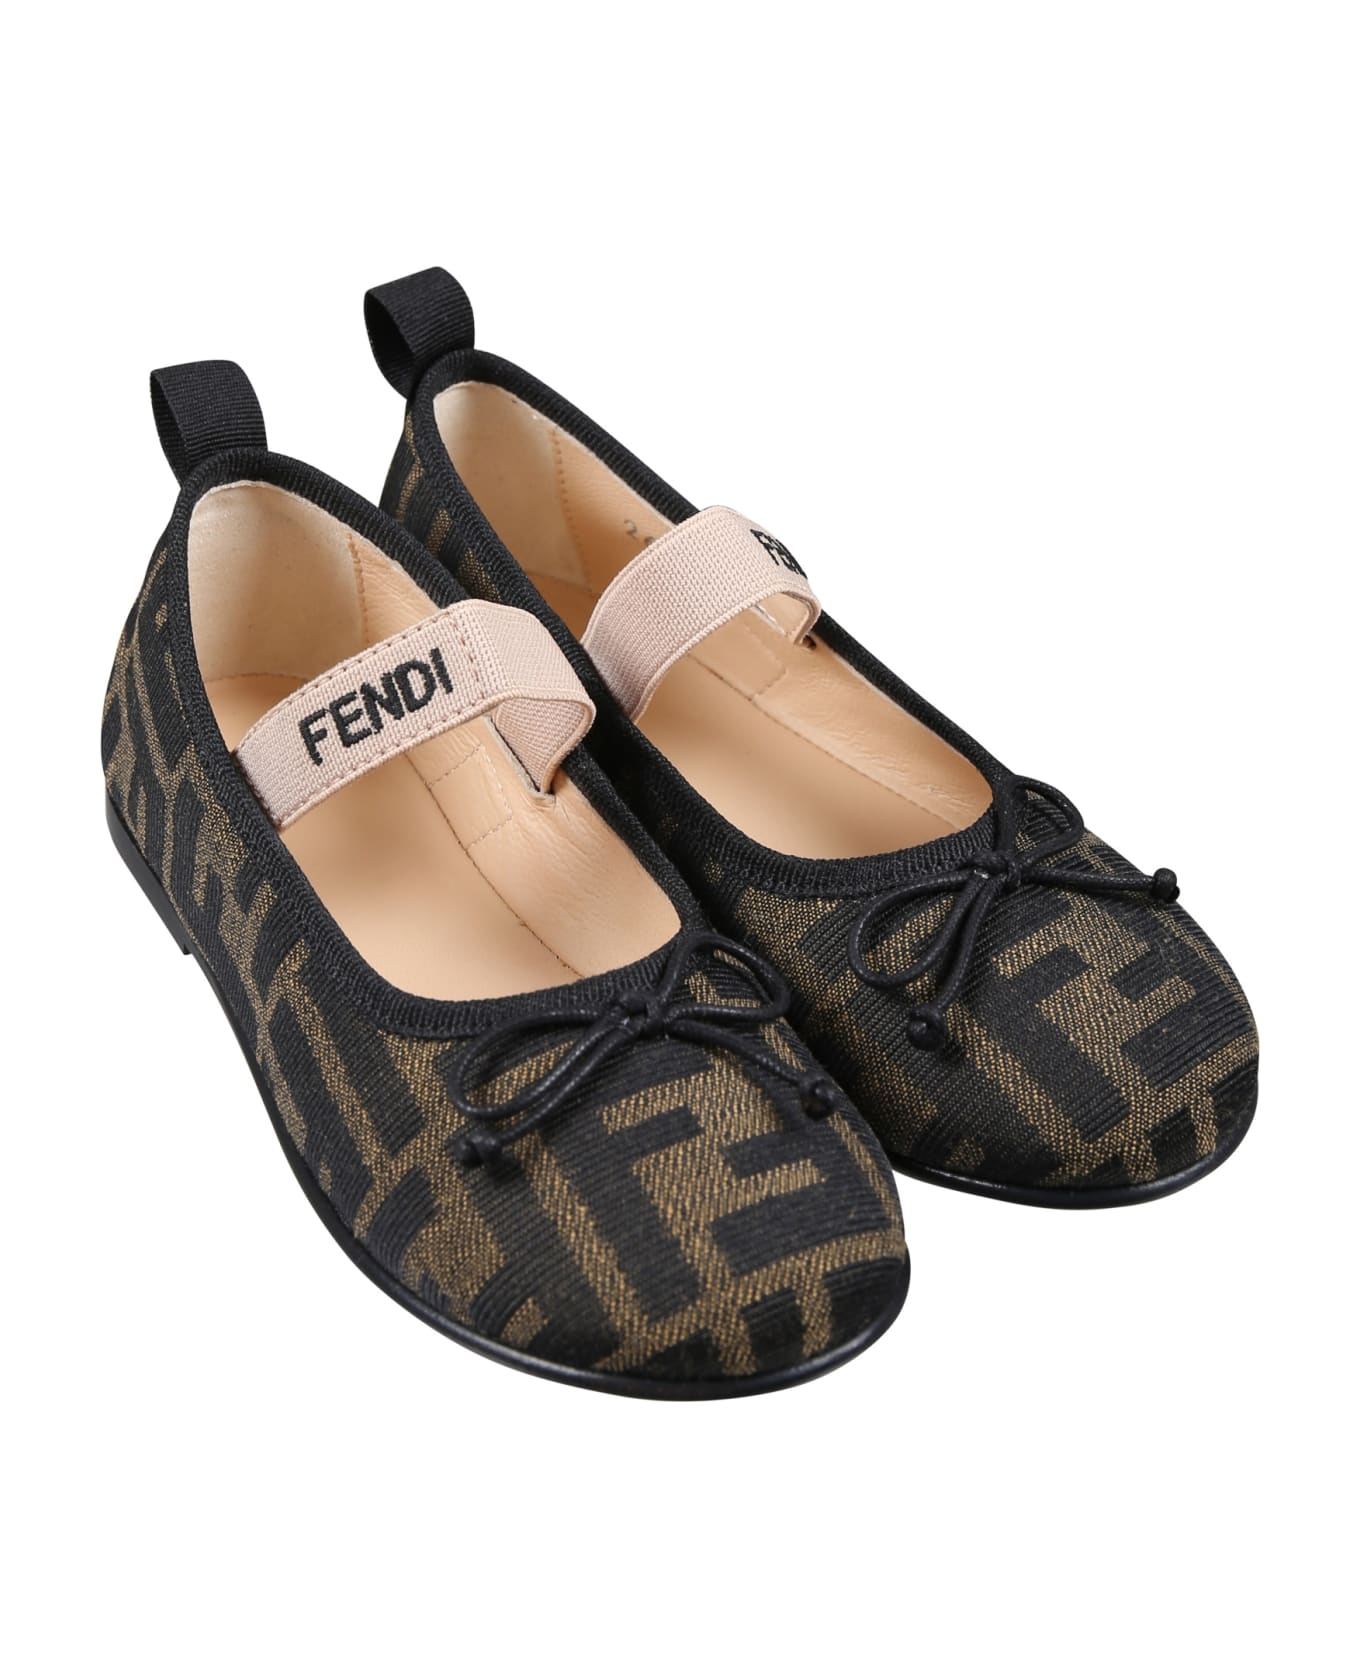 Fendi Ballet Flats For Girl With All-over Ff Logo - Brown シューズ